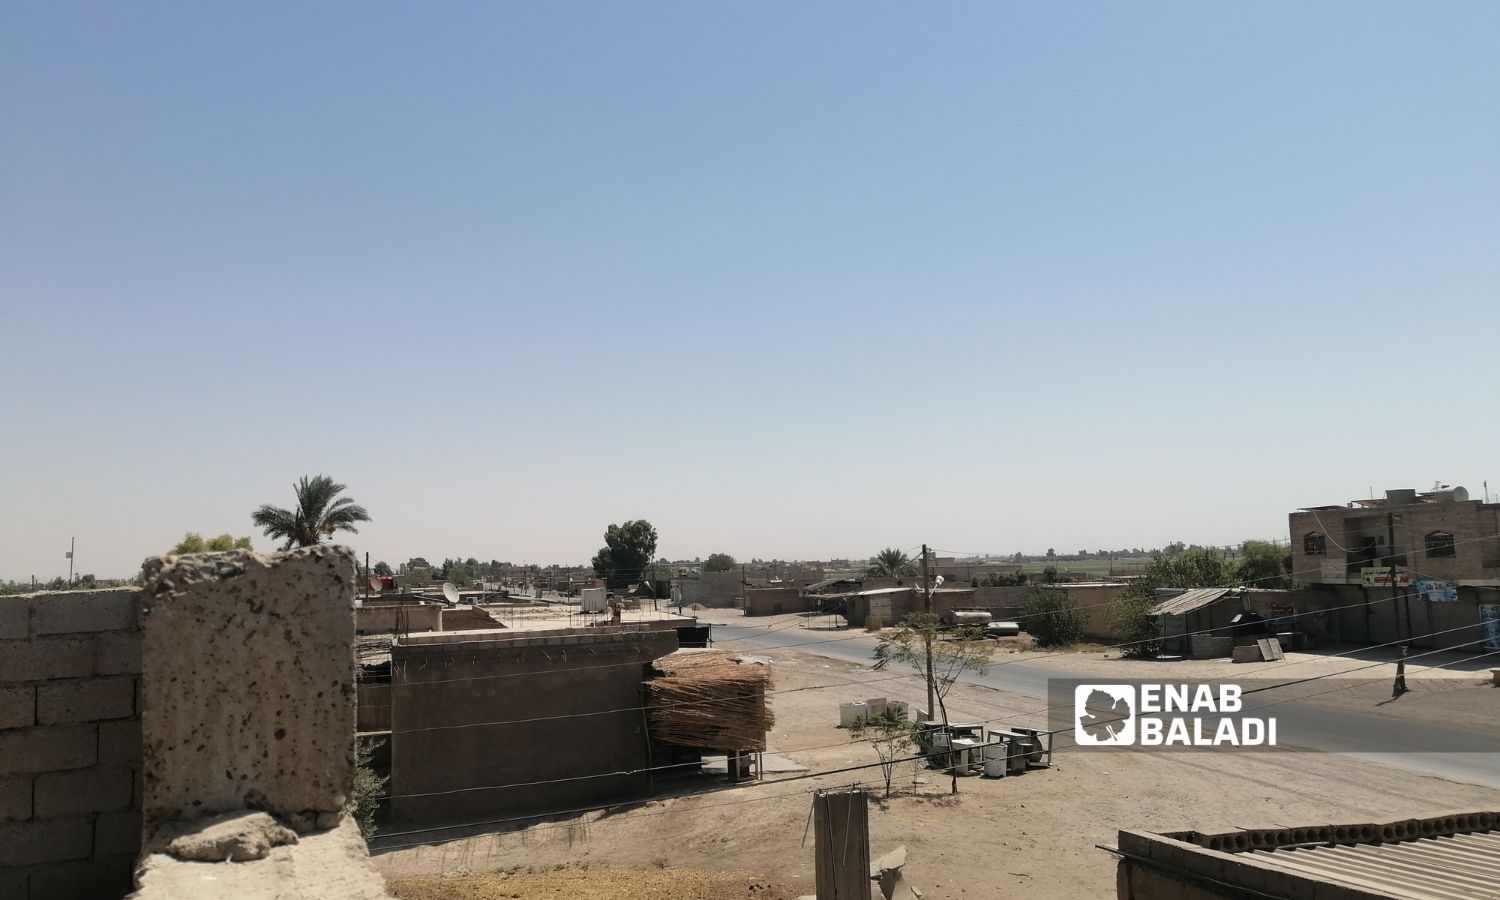 The SDF imposed a curfew in the town of al-Sabha, east of Deir Ezzor, and other villages, coinciding with military confrontations (Enab Baladi/Obada al-Sheikh)